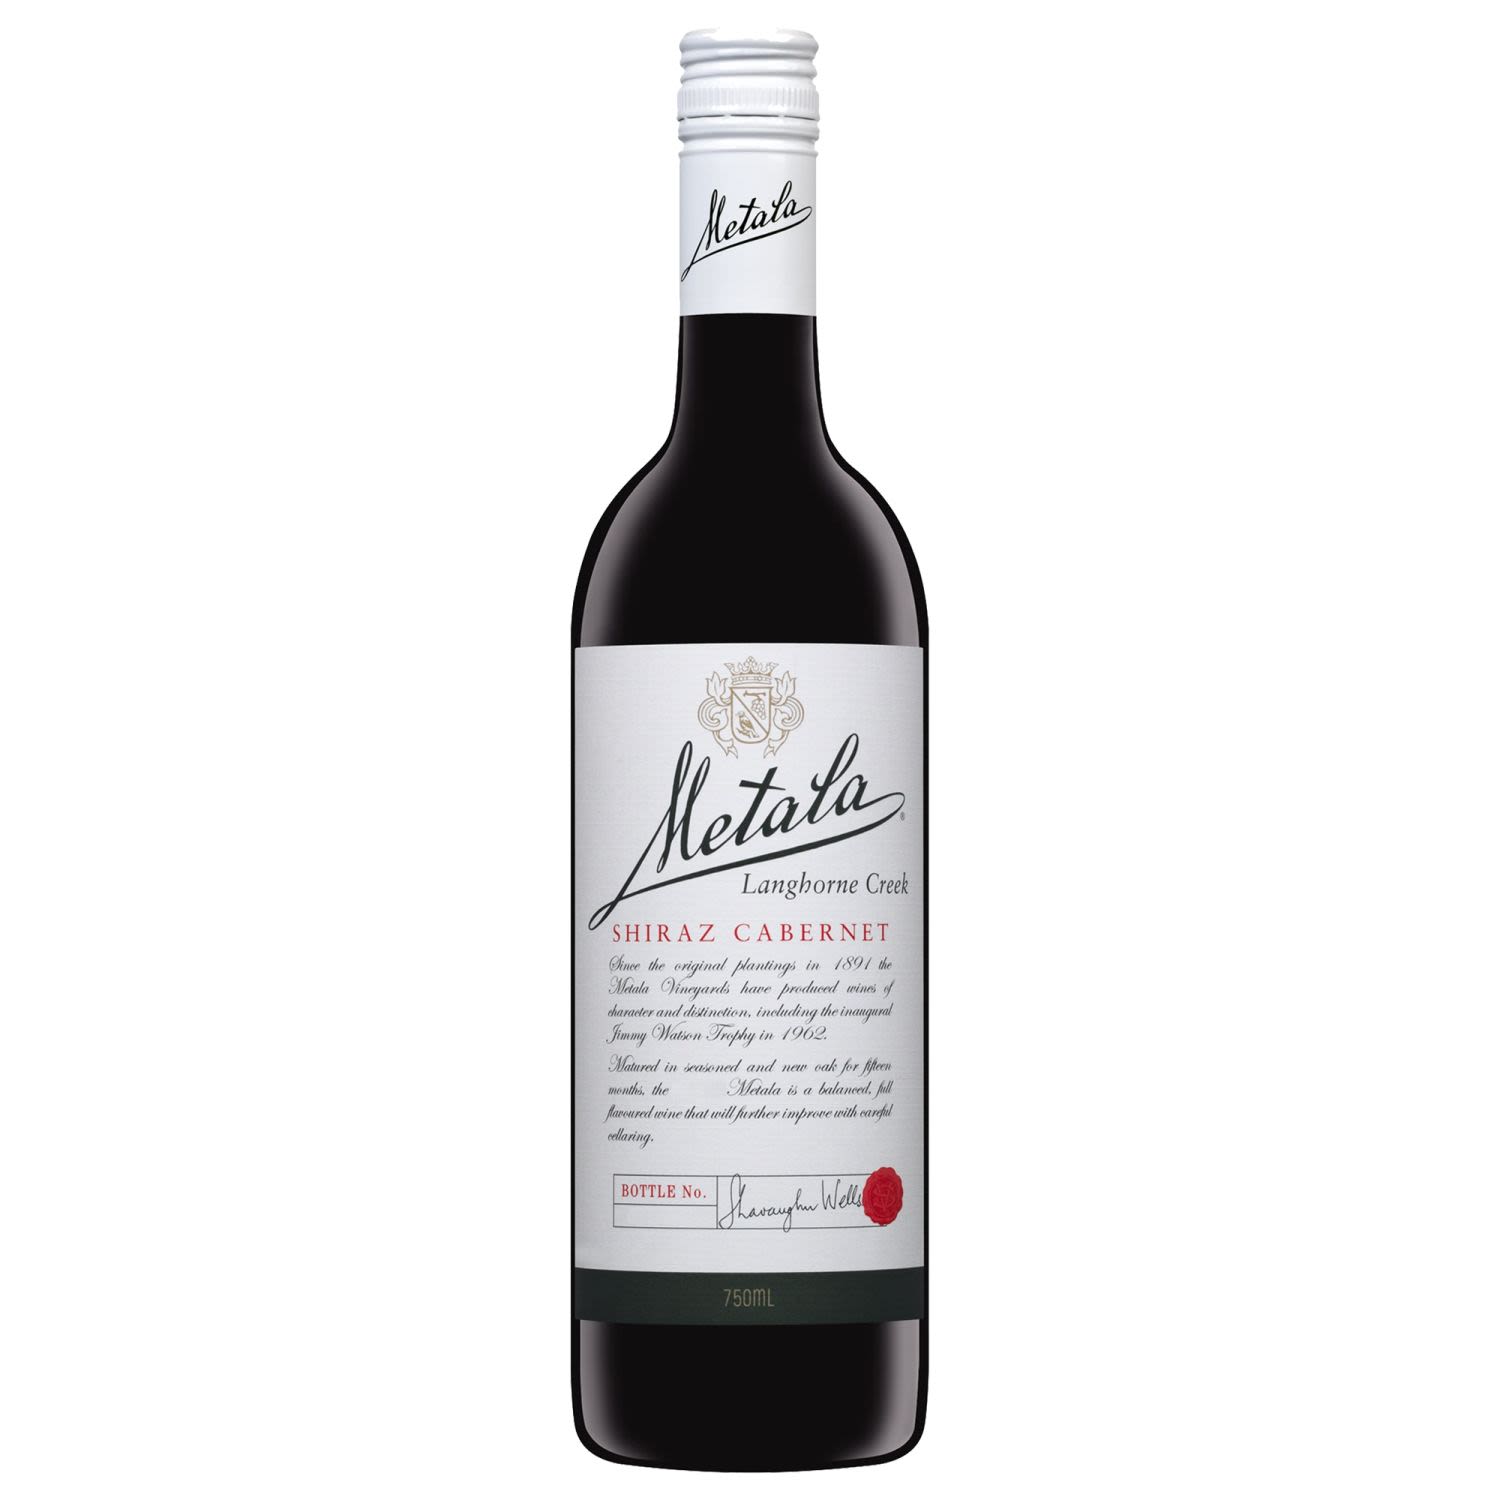 Metala White Label Single Vineyard Shiraz Cabernet was first released in 1961 & after 50 years continues to be a single vineyard wine. With notes of blackberries & plums this wine is rich & full bodied with fine velvety tannins & length of flavour.<br /> <br />Alcohol Volume: 15.00%<br /><br />Pack Format: Bottle<br /><br />Standard Drinks: 8.9</br /><br />Pack Type: Bottle<br /><br />Country of Origin: Australia<br /><br />Region: Langhorne Creek<br /><br />Vintage: Vintages Vary<br />